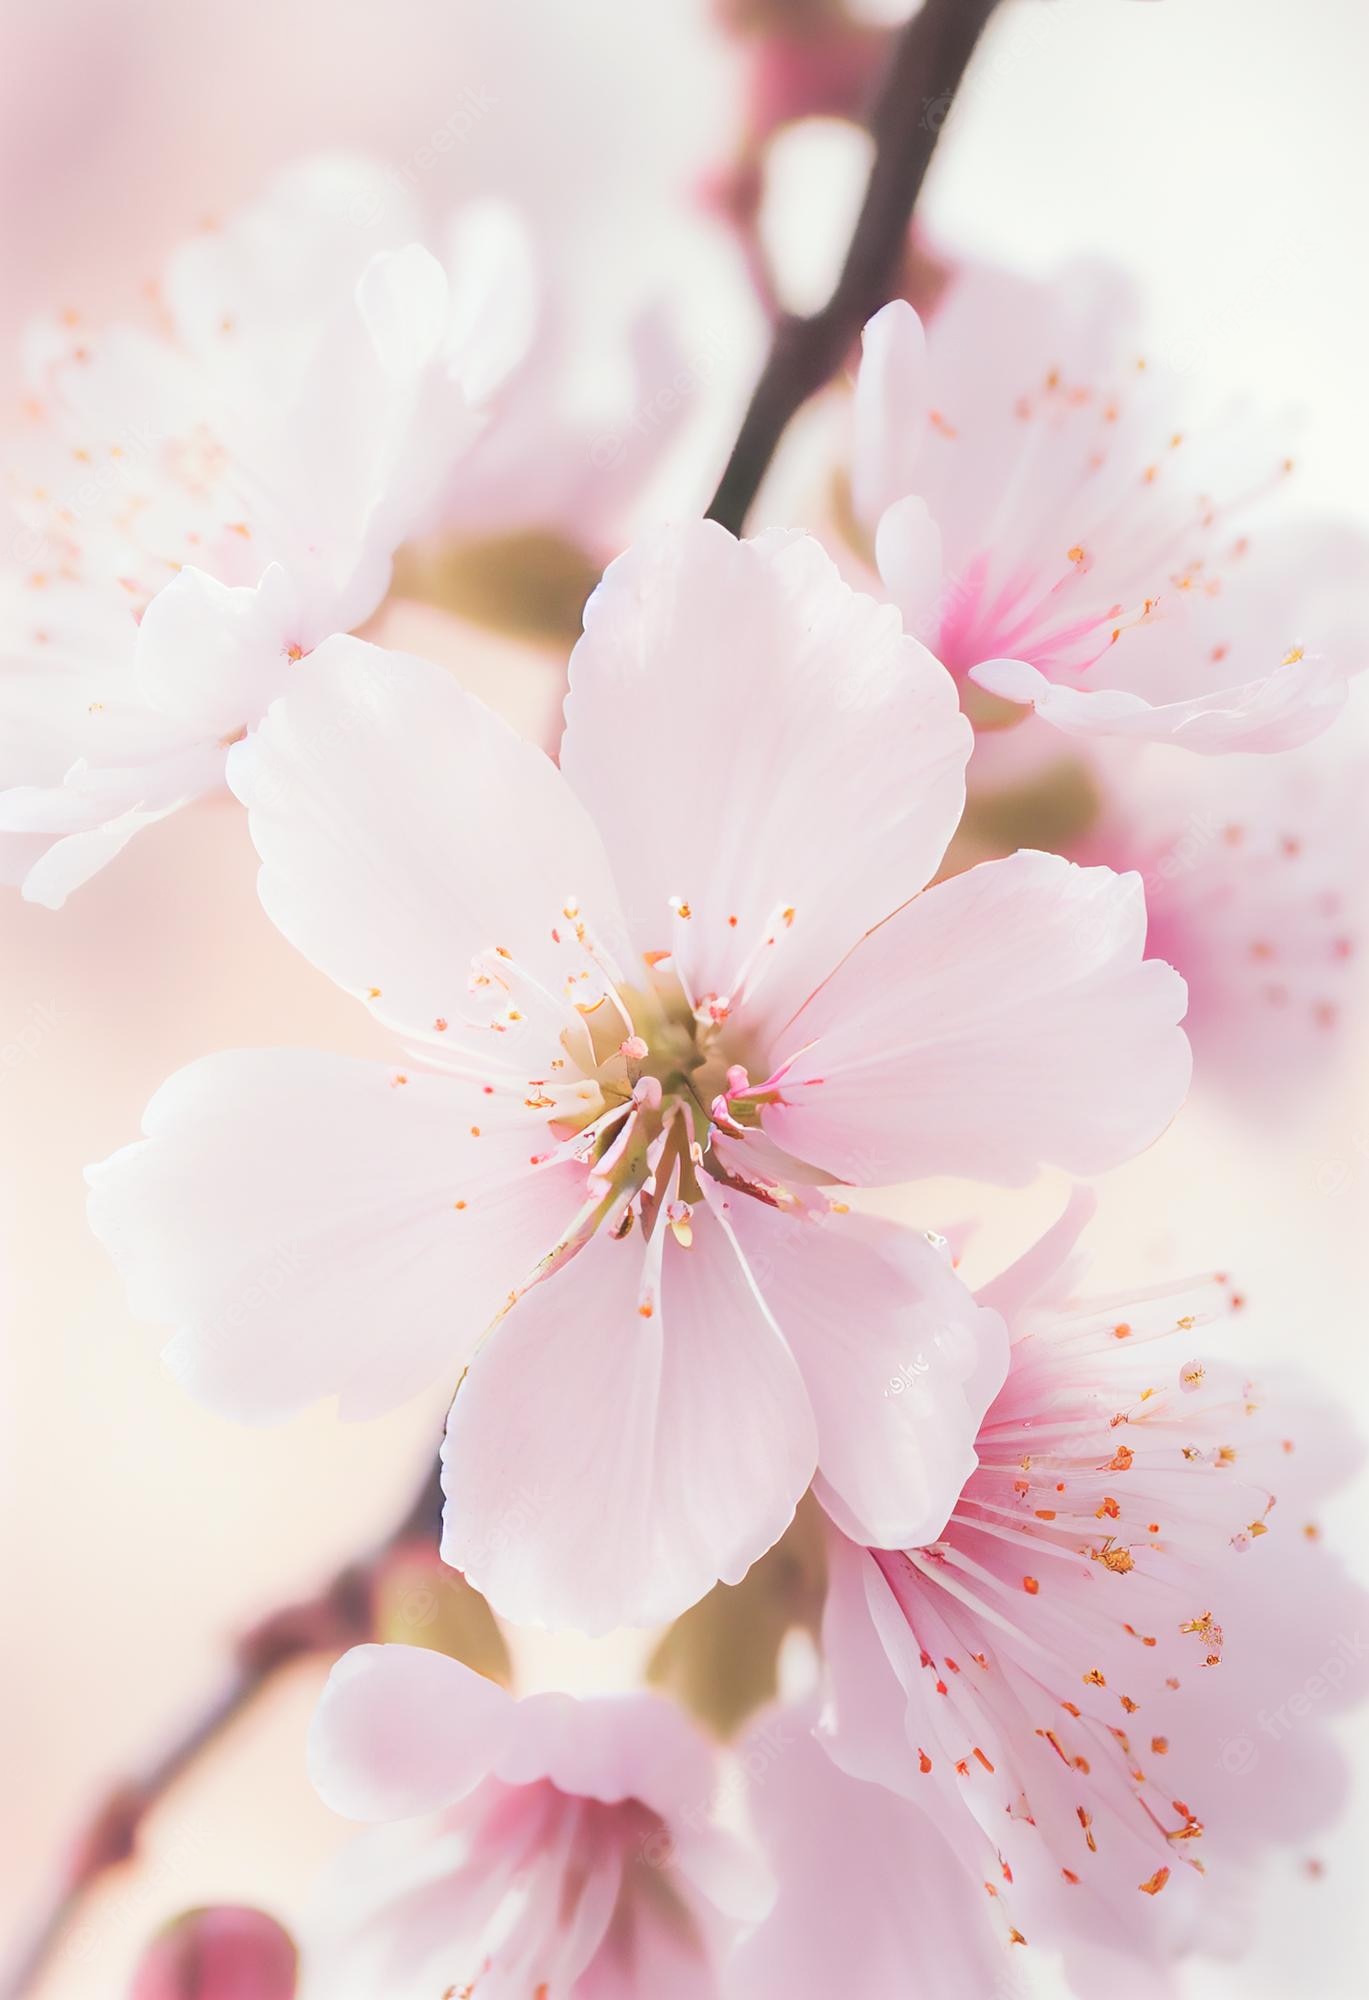 Premium Photo. Spring cherry blossom against pastel pink and white background shallow depth of field dreamy effect